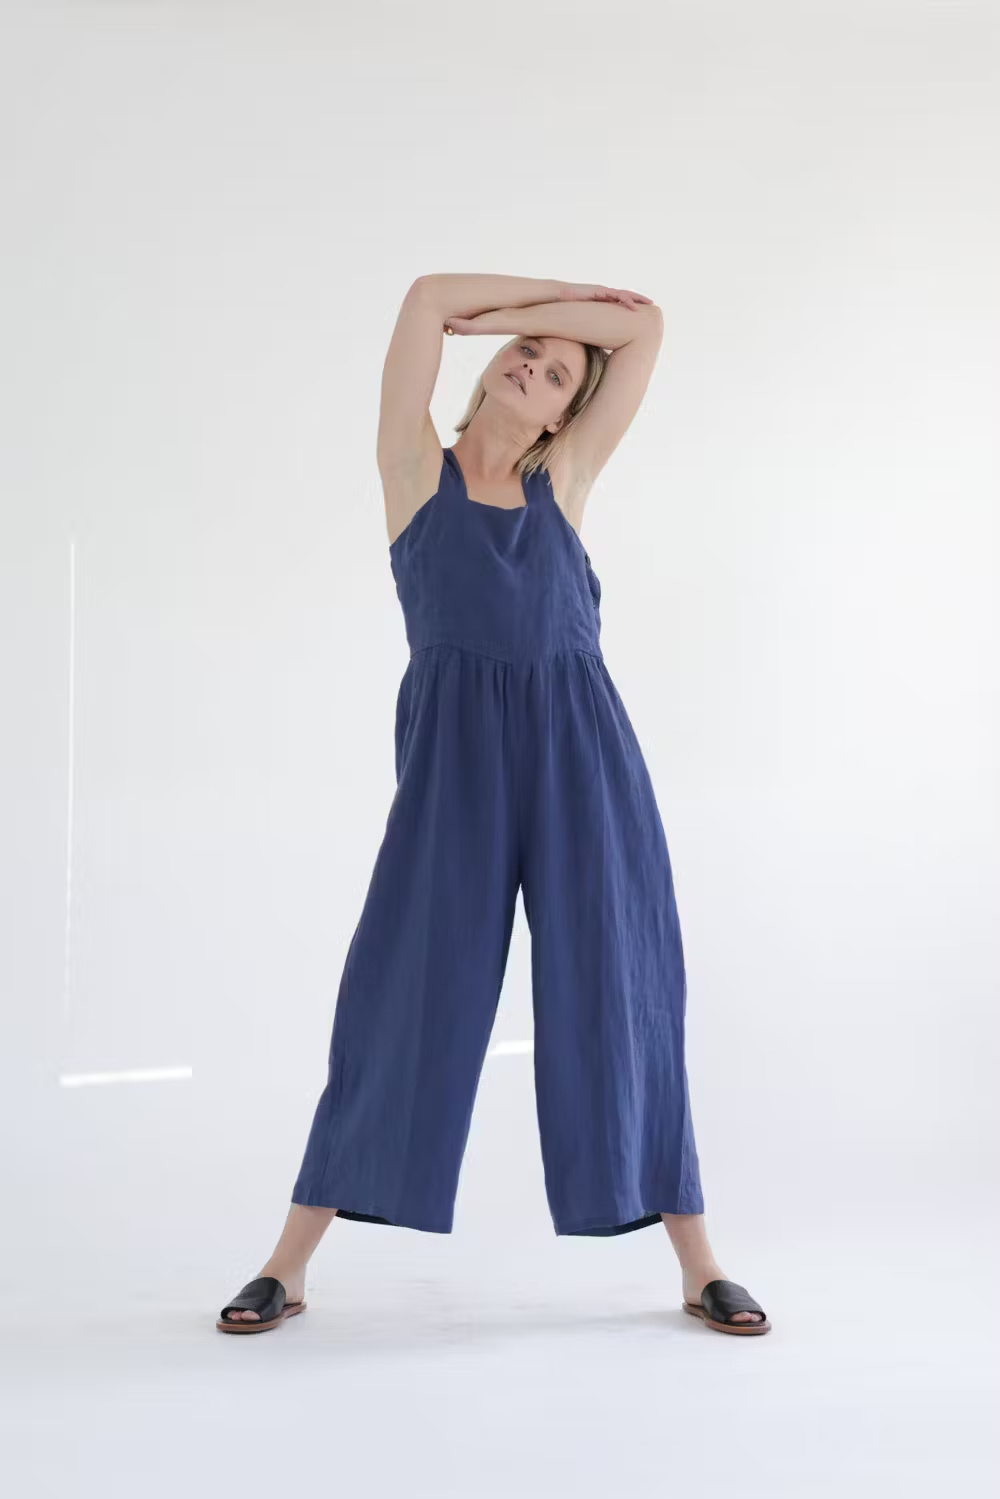 a. model in the blue jumpsuit